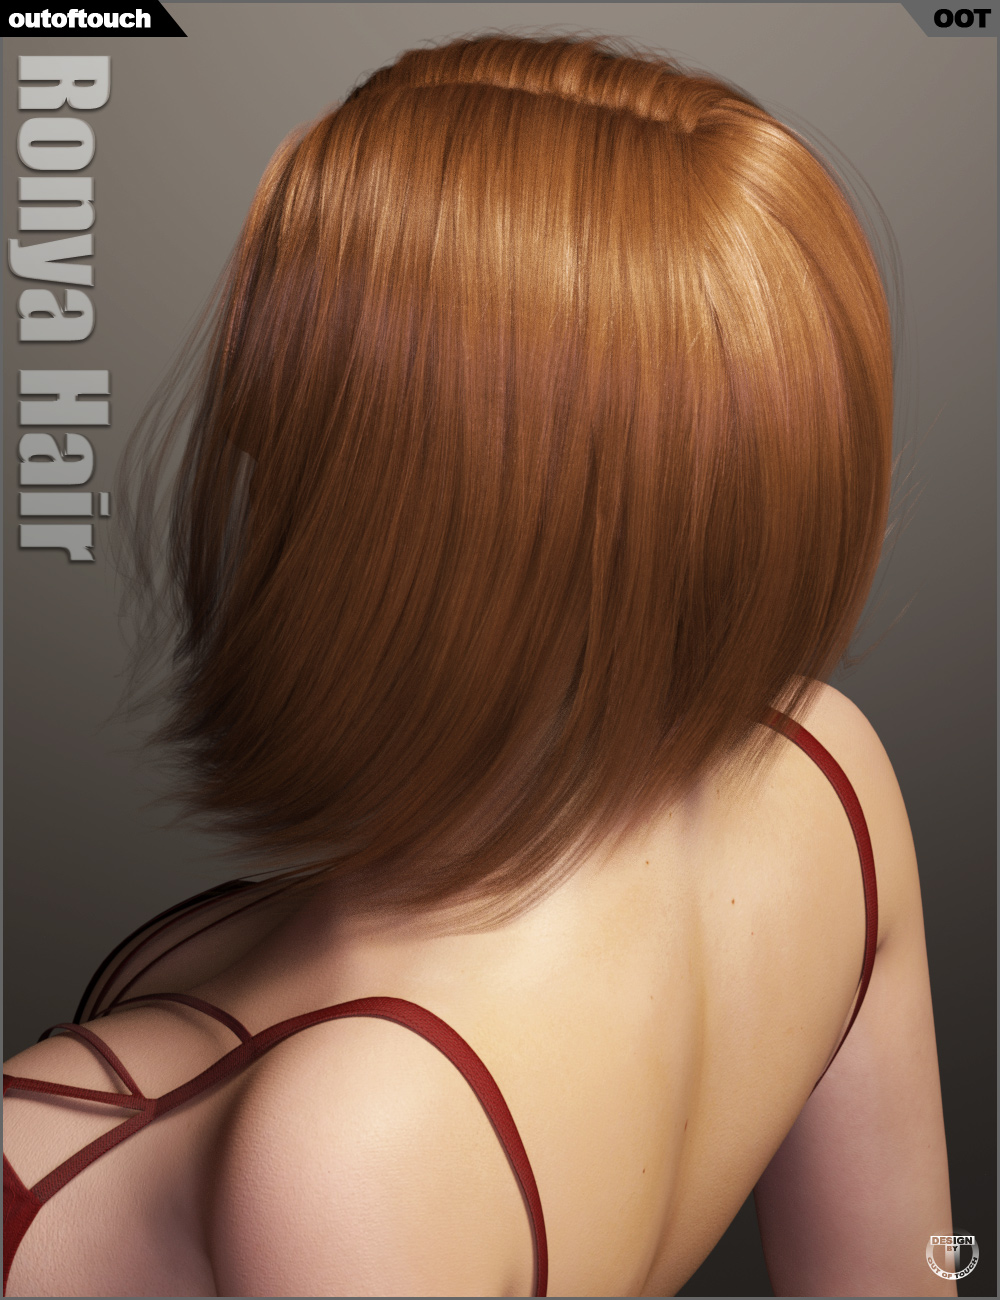 Ronya Hair by: outoftouch, 3D Models by Daz 3D